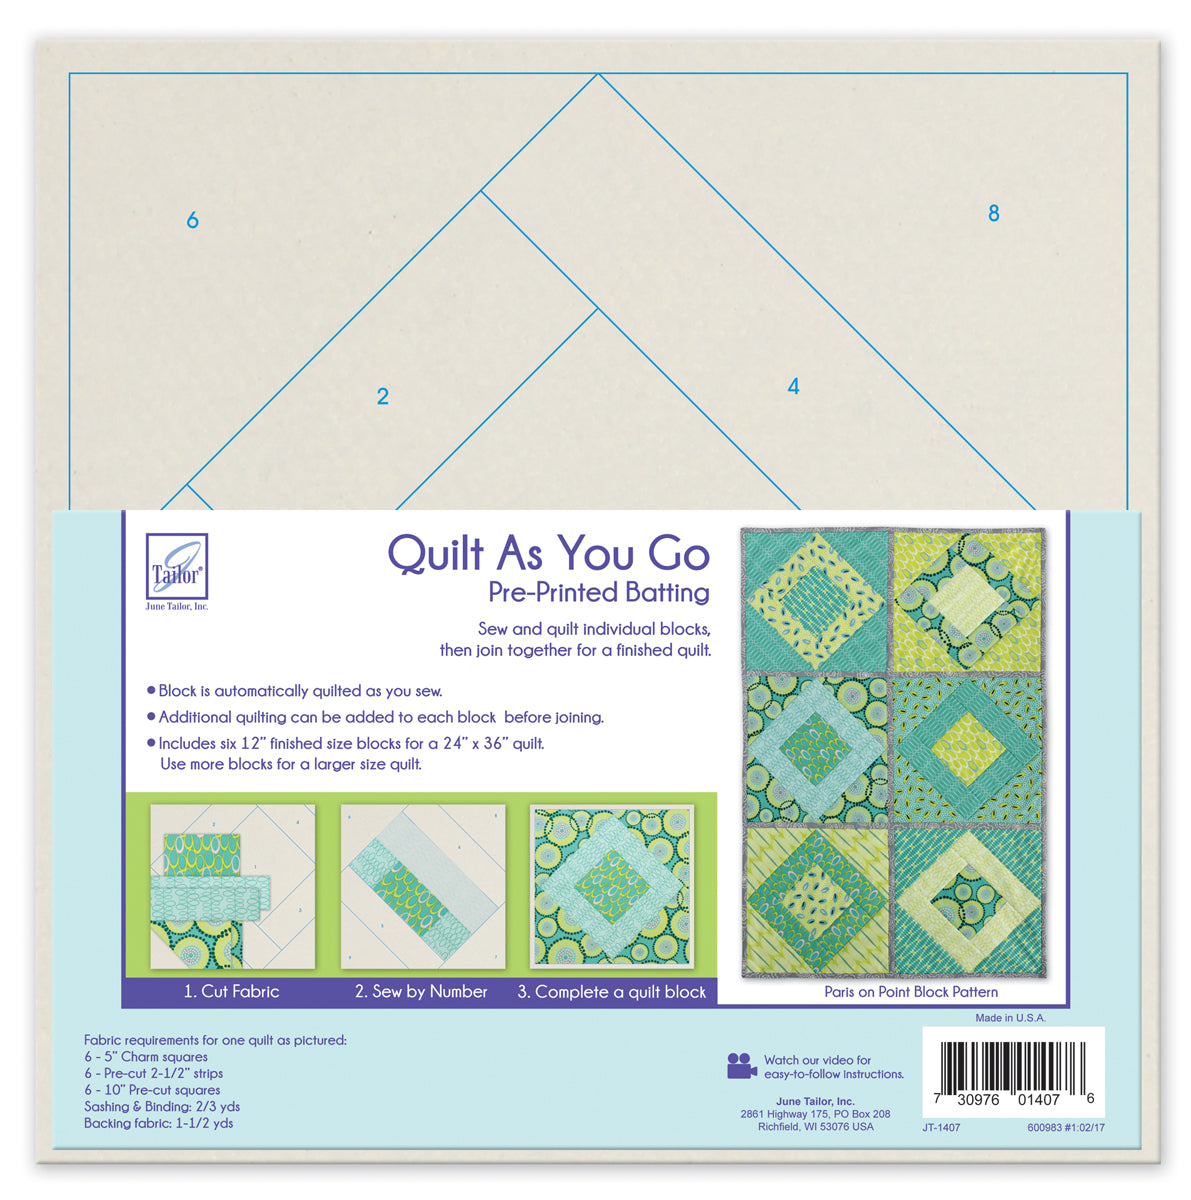 Quilt-as-you-go (The Chilton needlework series)